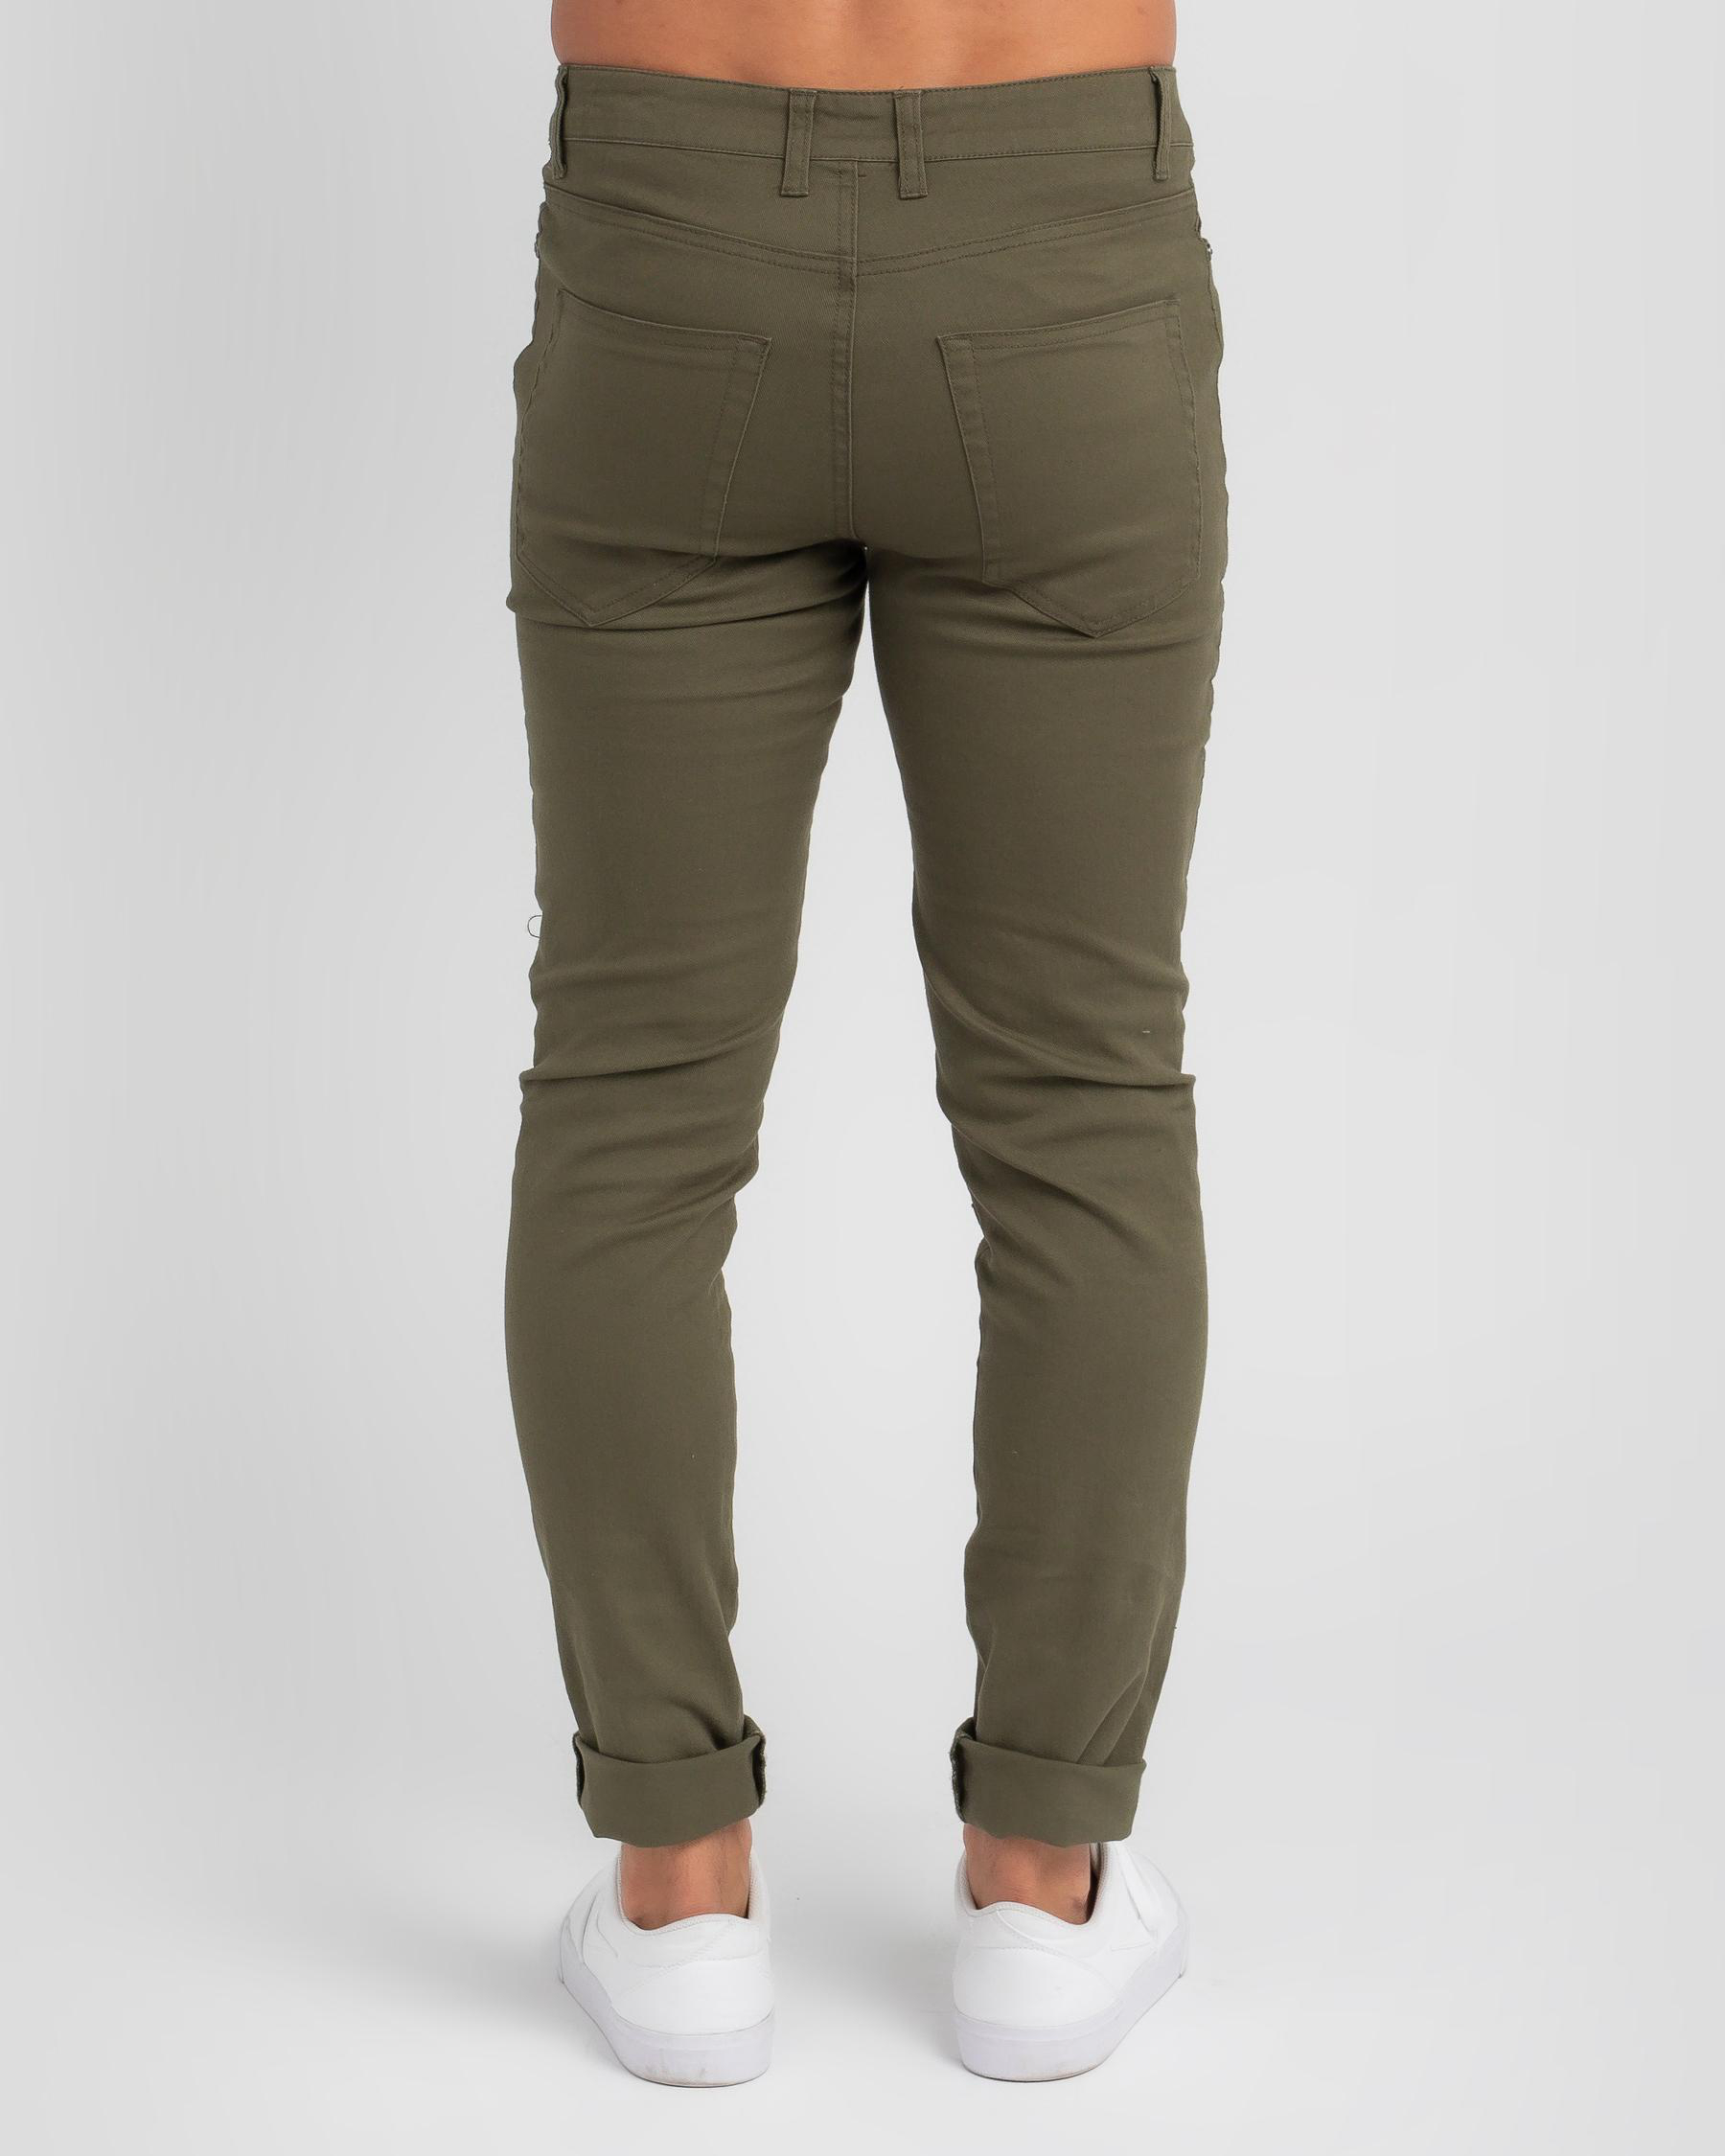 Lucid Grid Jeans In Olive - Fast Shipping & Easy Returns - City Beach ...